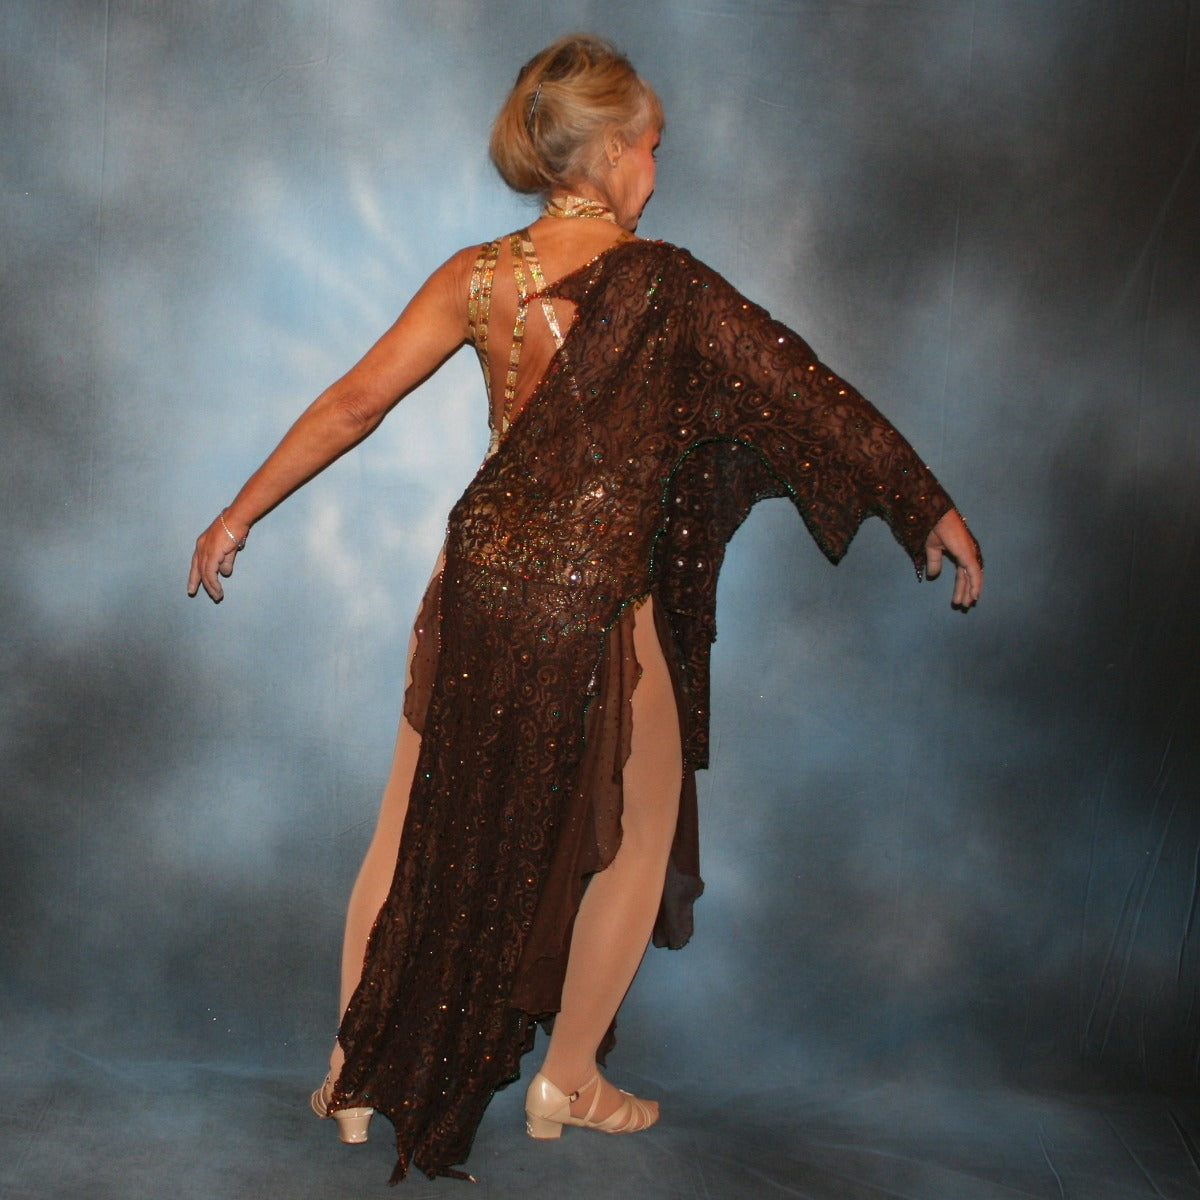 Crystal's Creations back view of Gold tango dress or Latin/rhythm dress created in chocolate brown stretch lace that is lavishly embellished with gold & a touch of emerald green Swarovski rhinestones overlayed & draped over a golden hologram tiger print bodysuit size 3/4-9/10